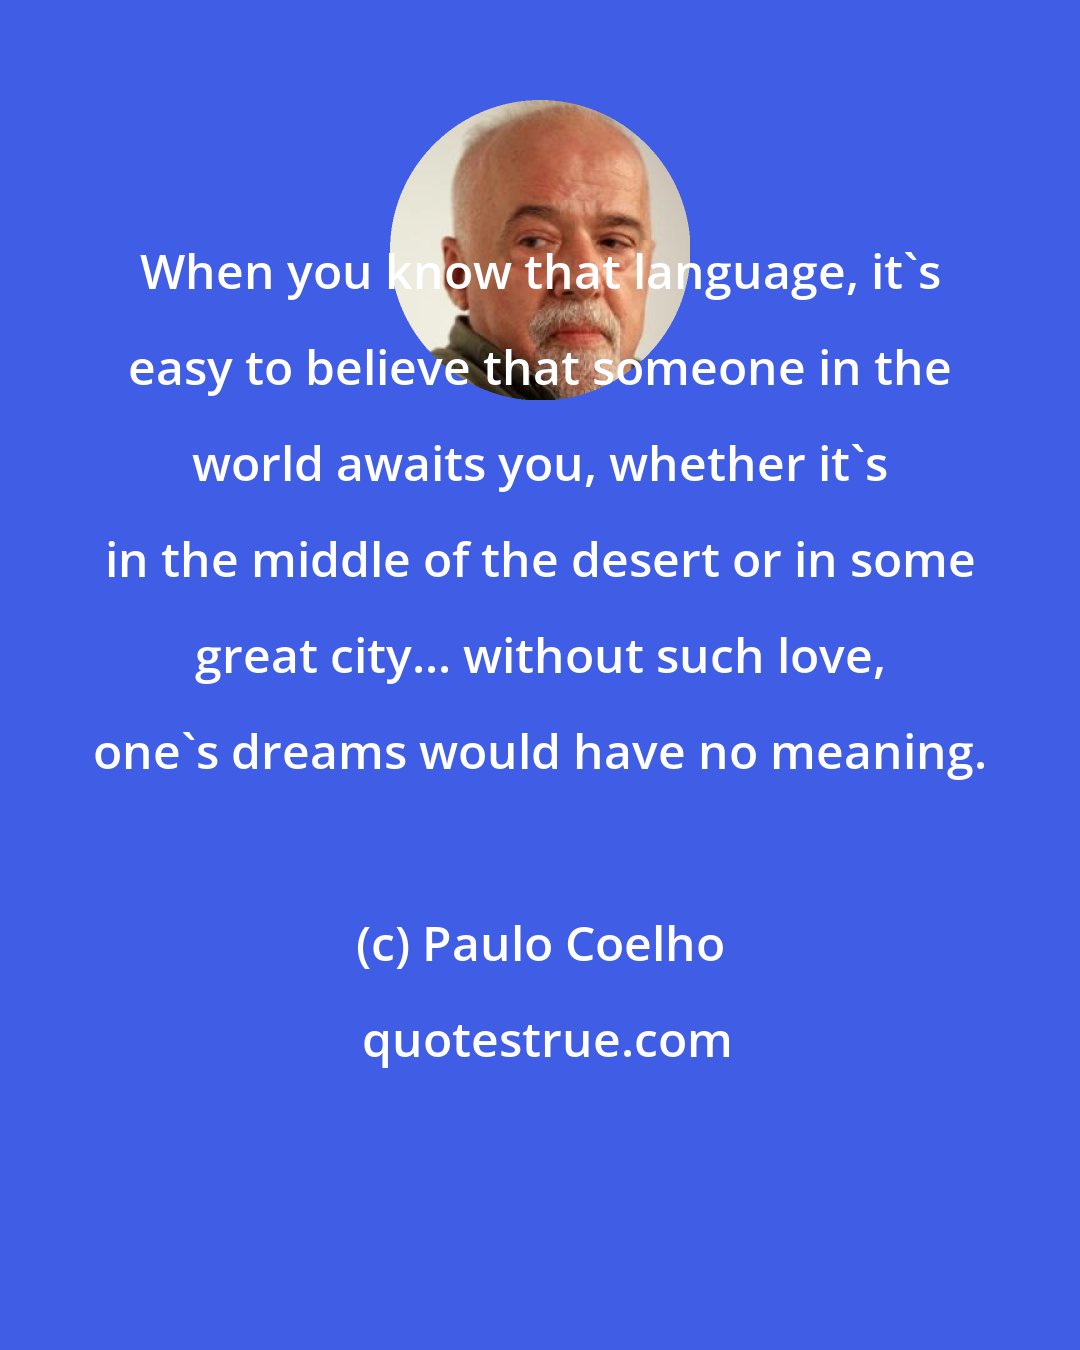 Paulo Coelho: When you know that language, it's easy to believe that someone in the world awaits you, whether it's in the middle of the desert or in some great city... without such love, one's dreams would have no meaning.